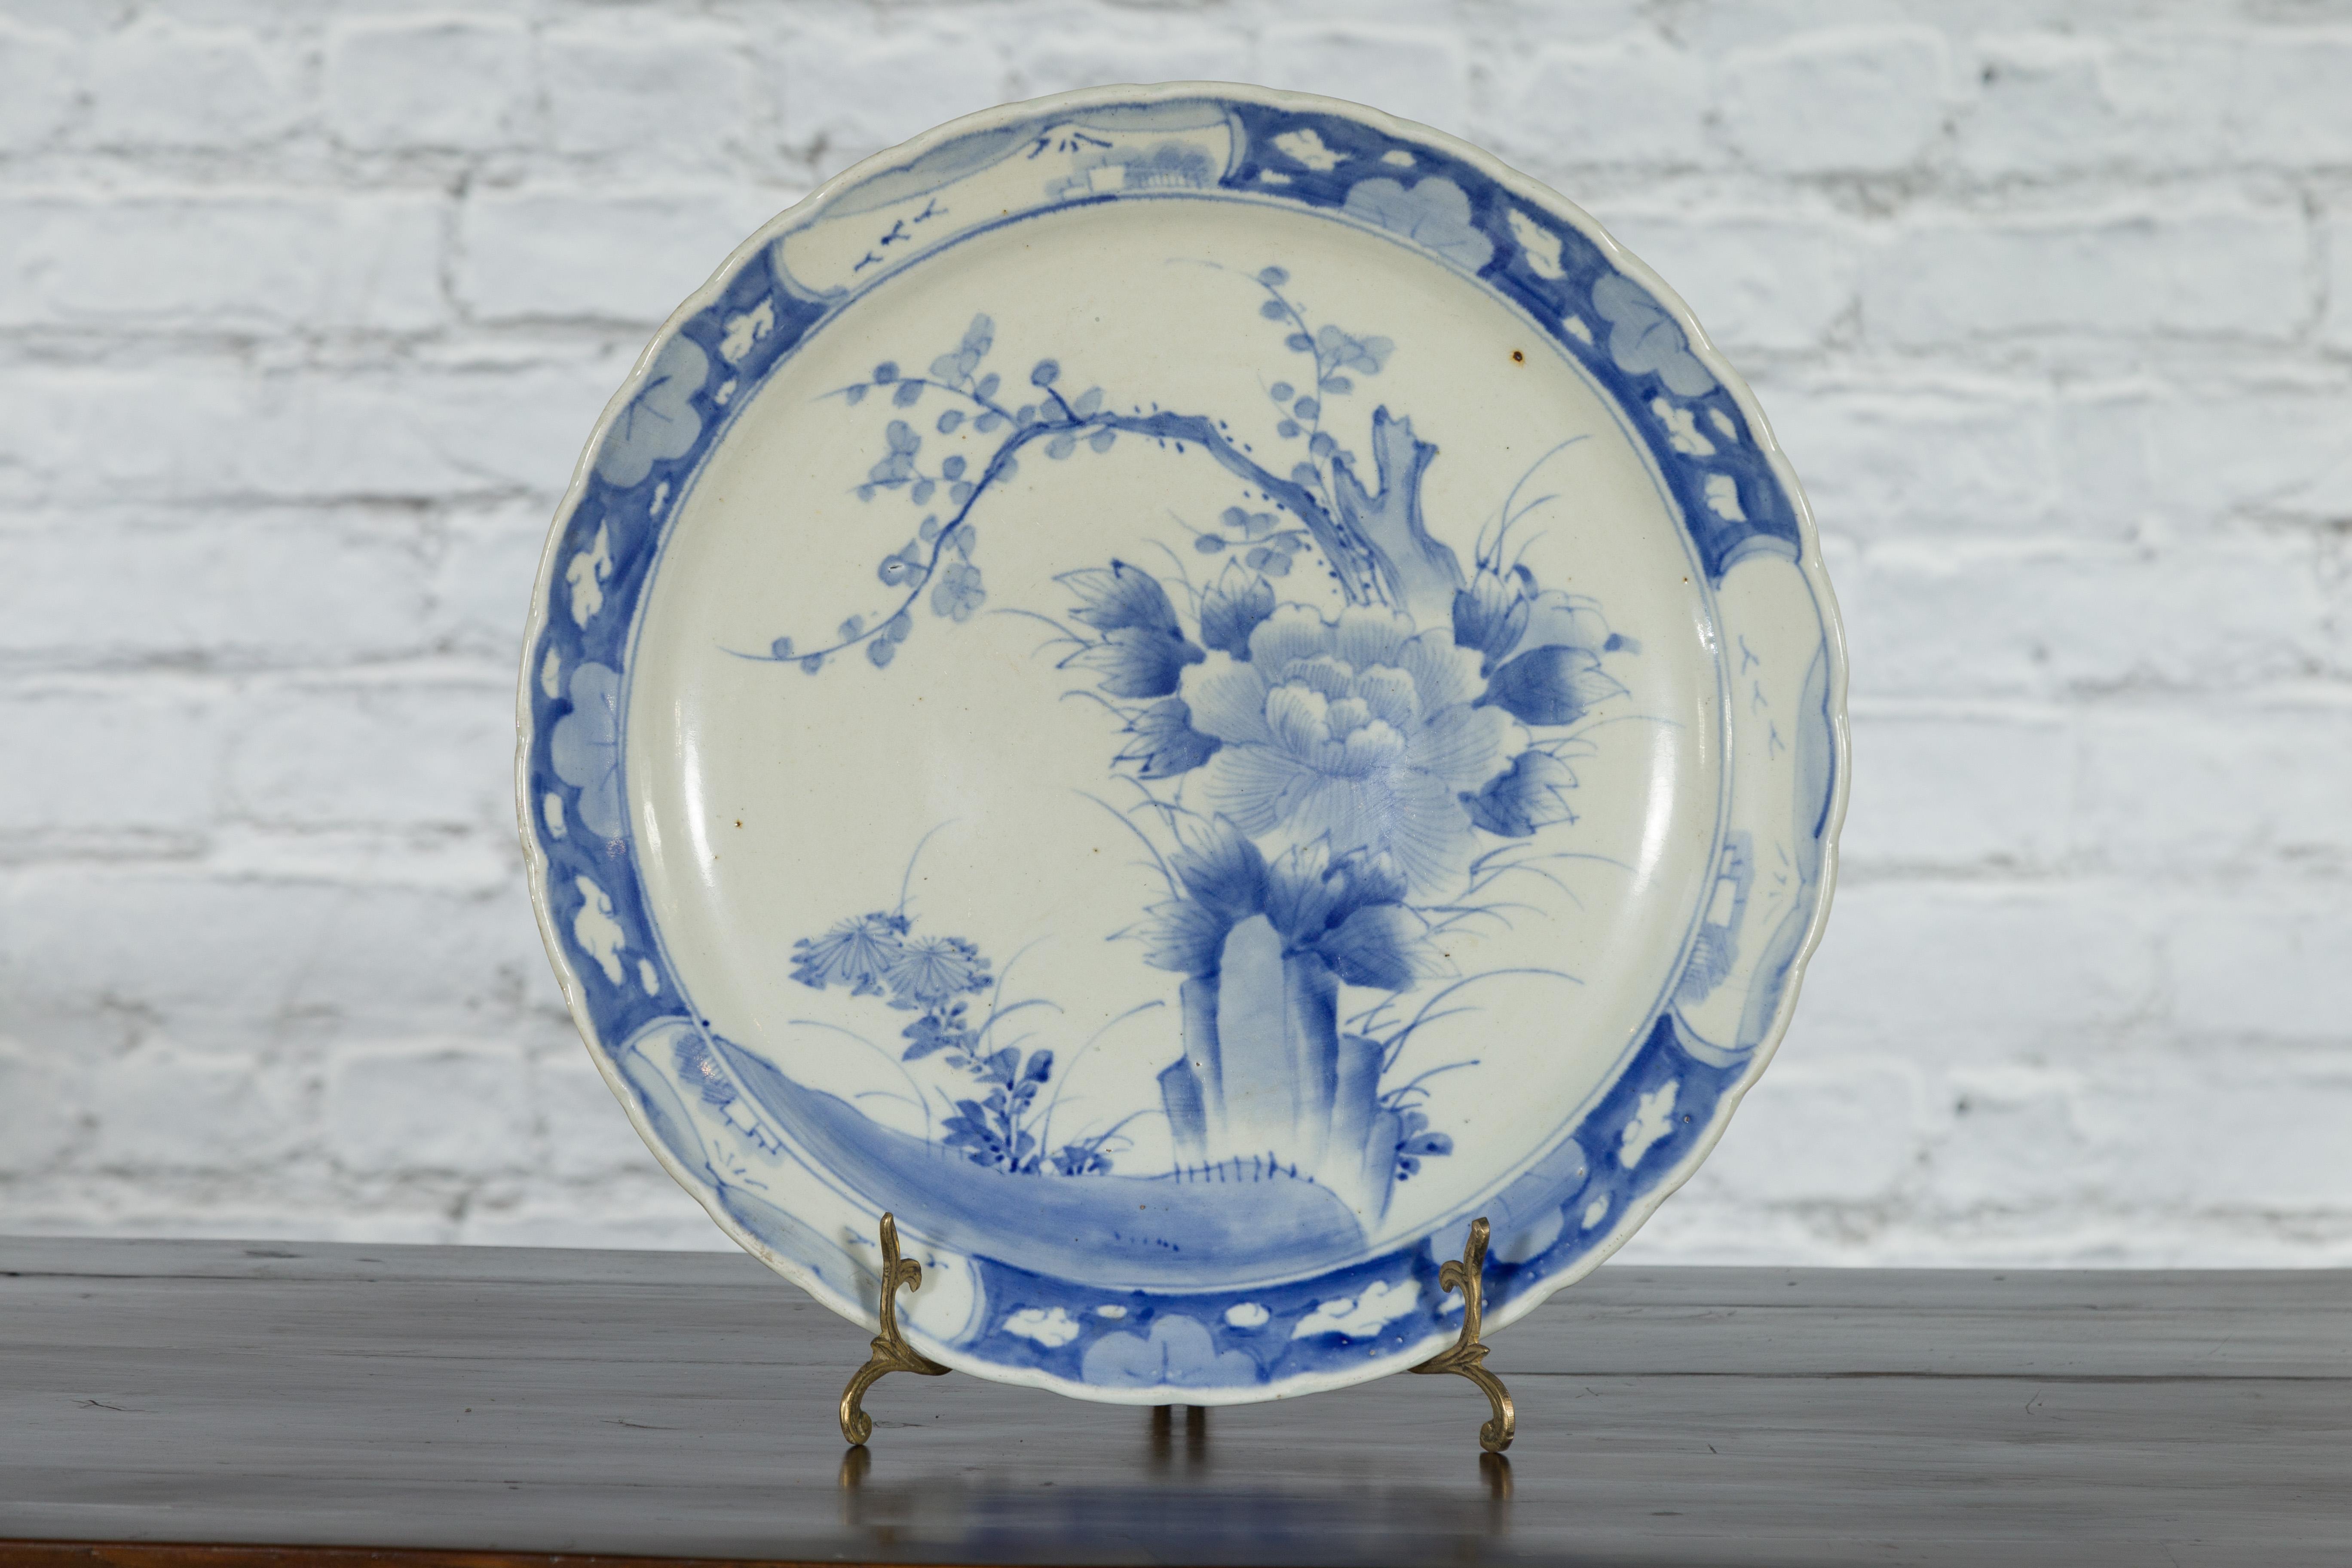 A Japanese porcelain plate from the 19th century, with hand-painted blue and white tree, foliage and rock décor. Created in Japan during the 19th century, this porcelain plate features a delicate blue and white décor depicting an artistic, balanced